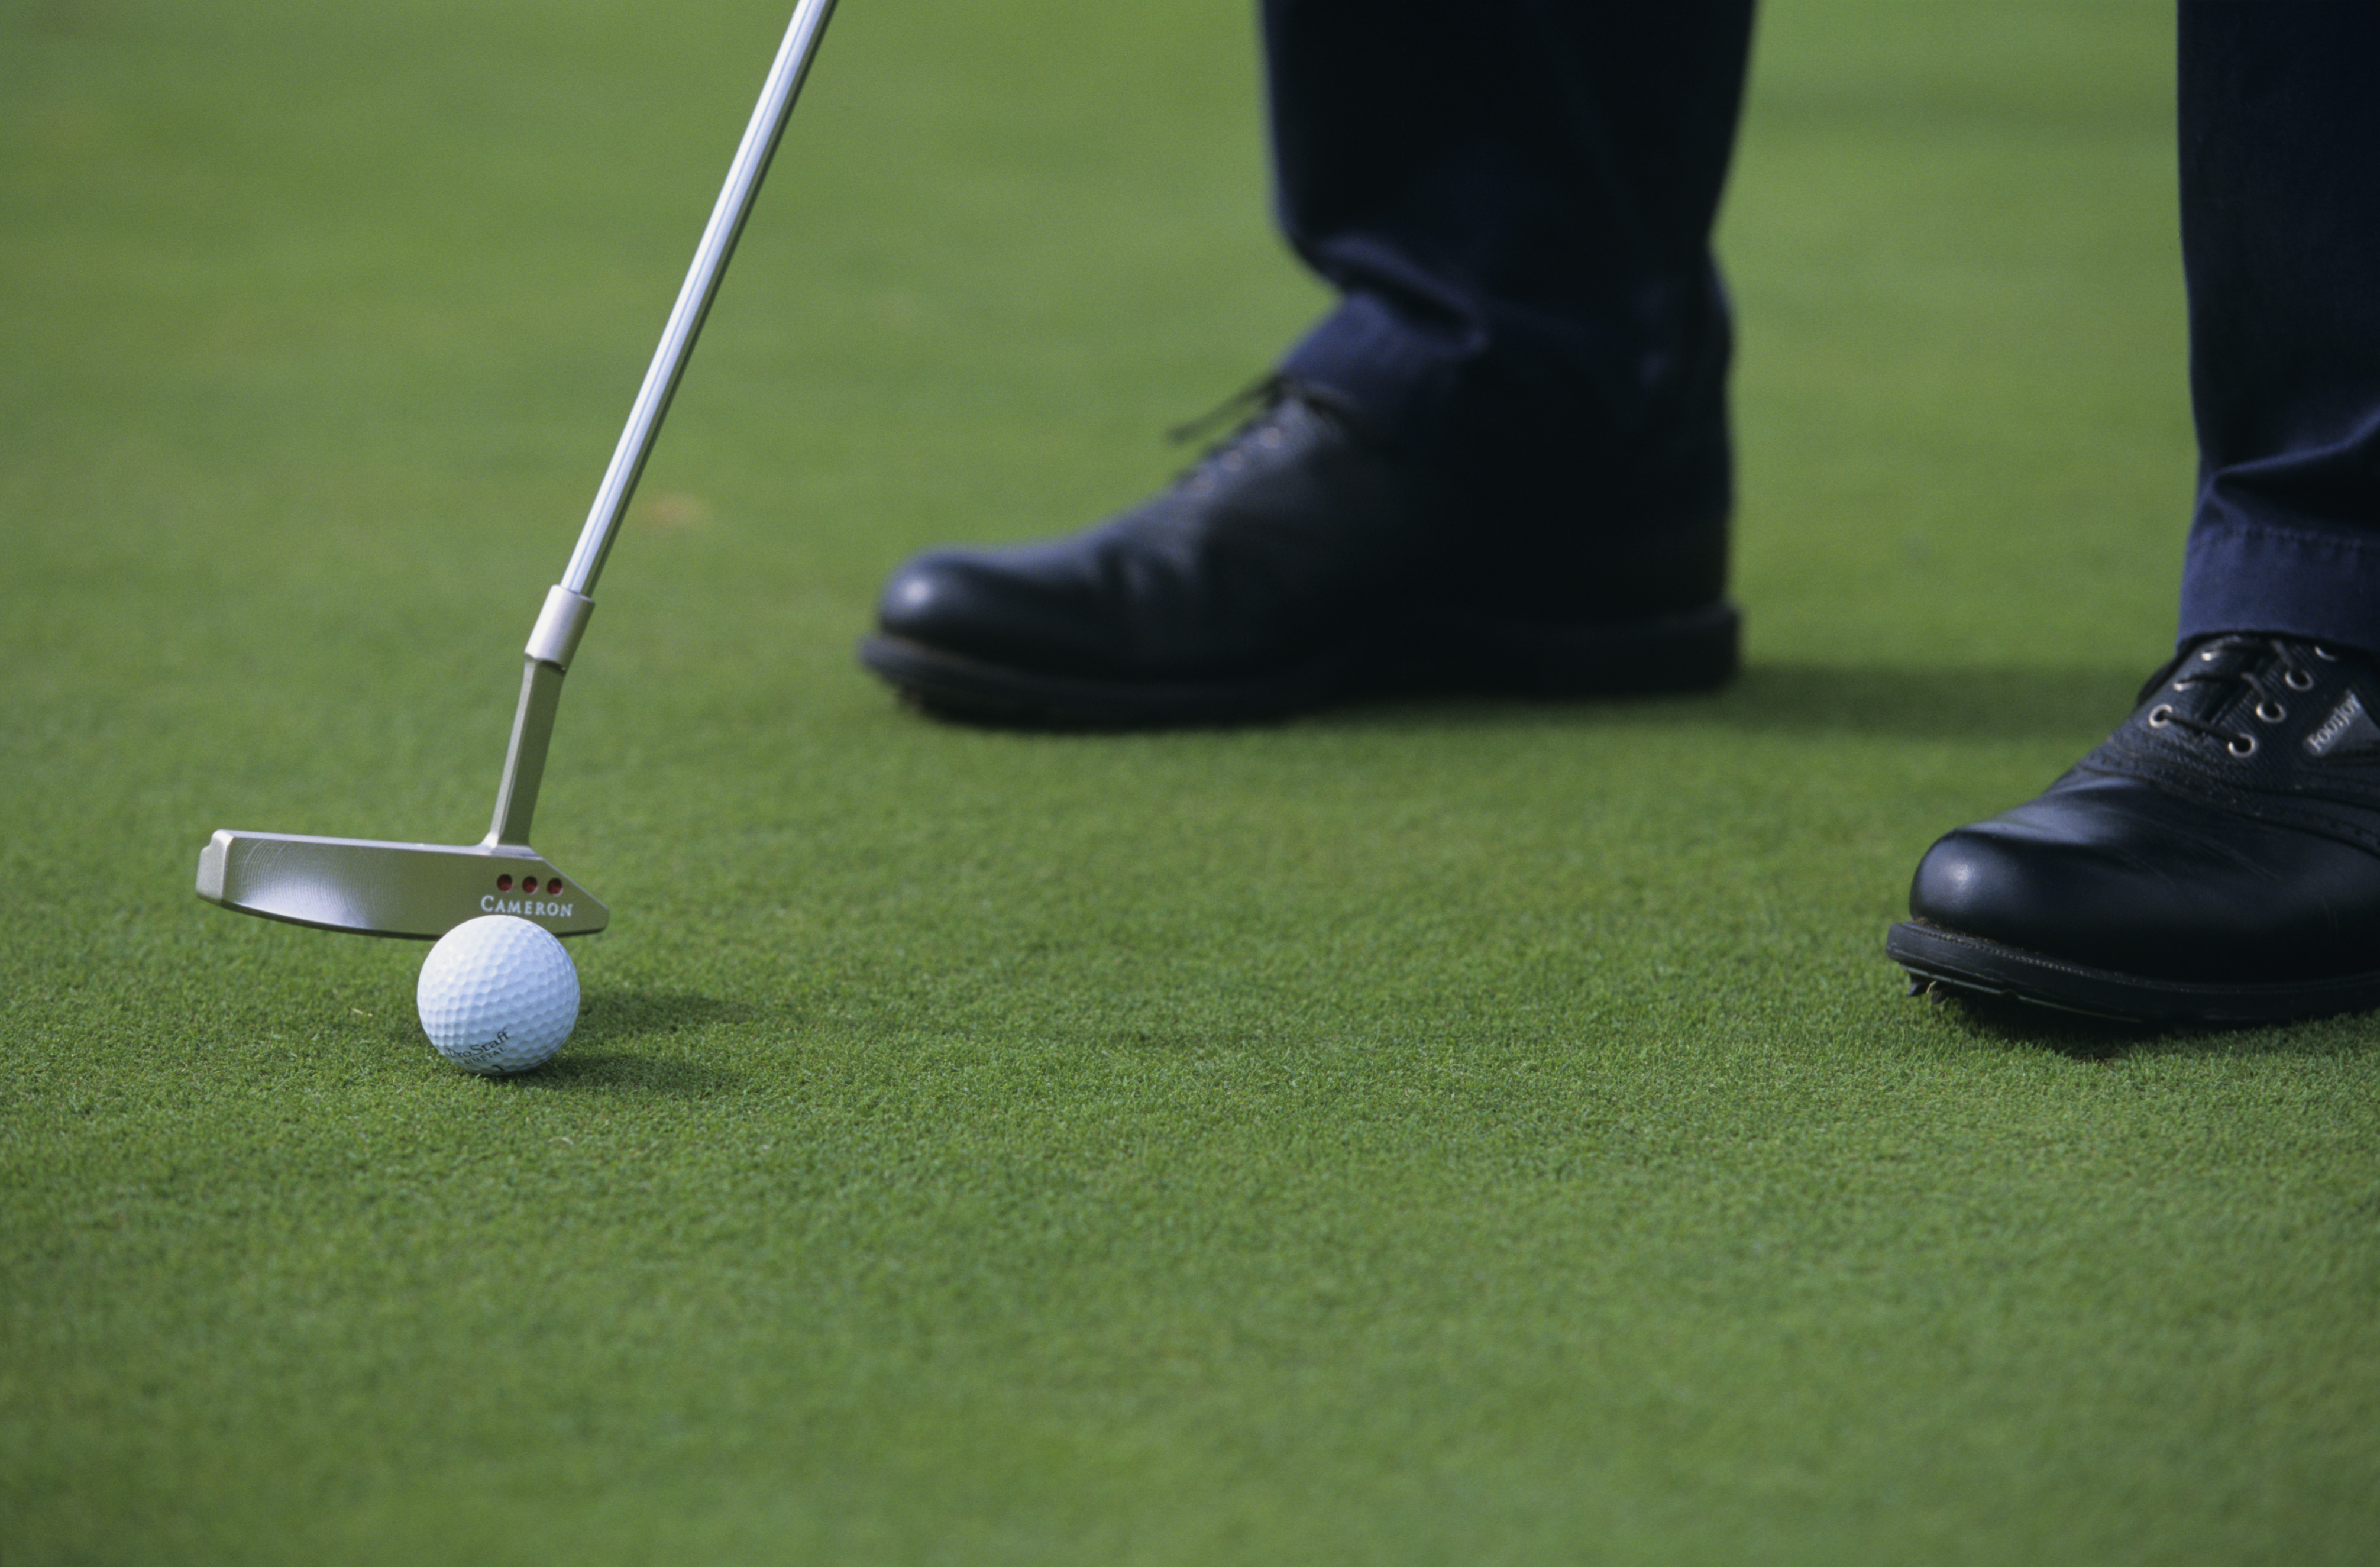 Drill those putts and get some birdies